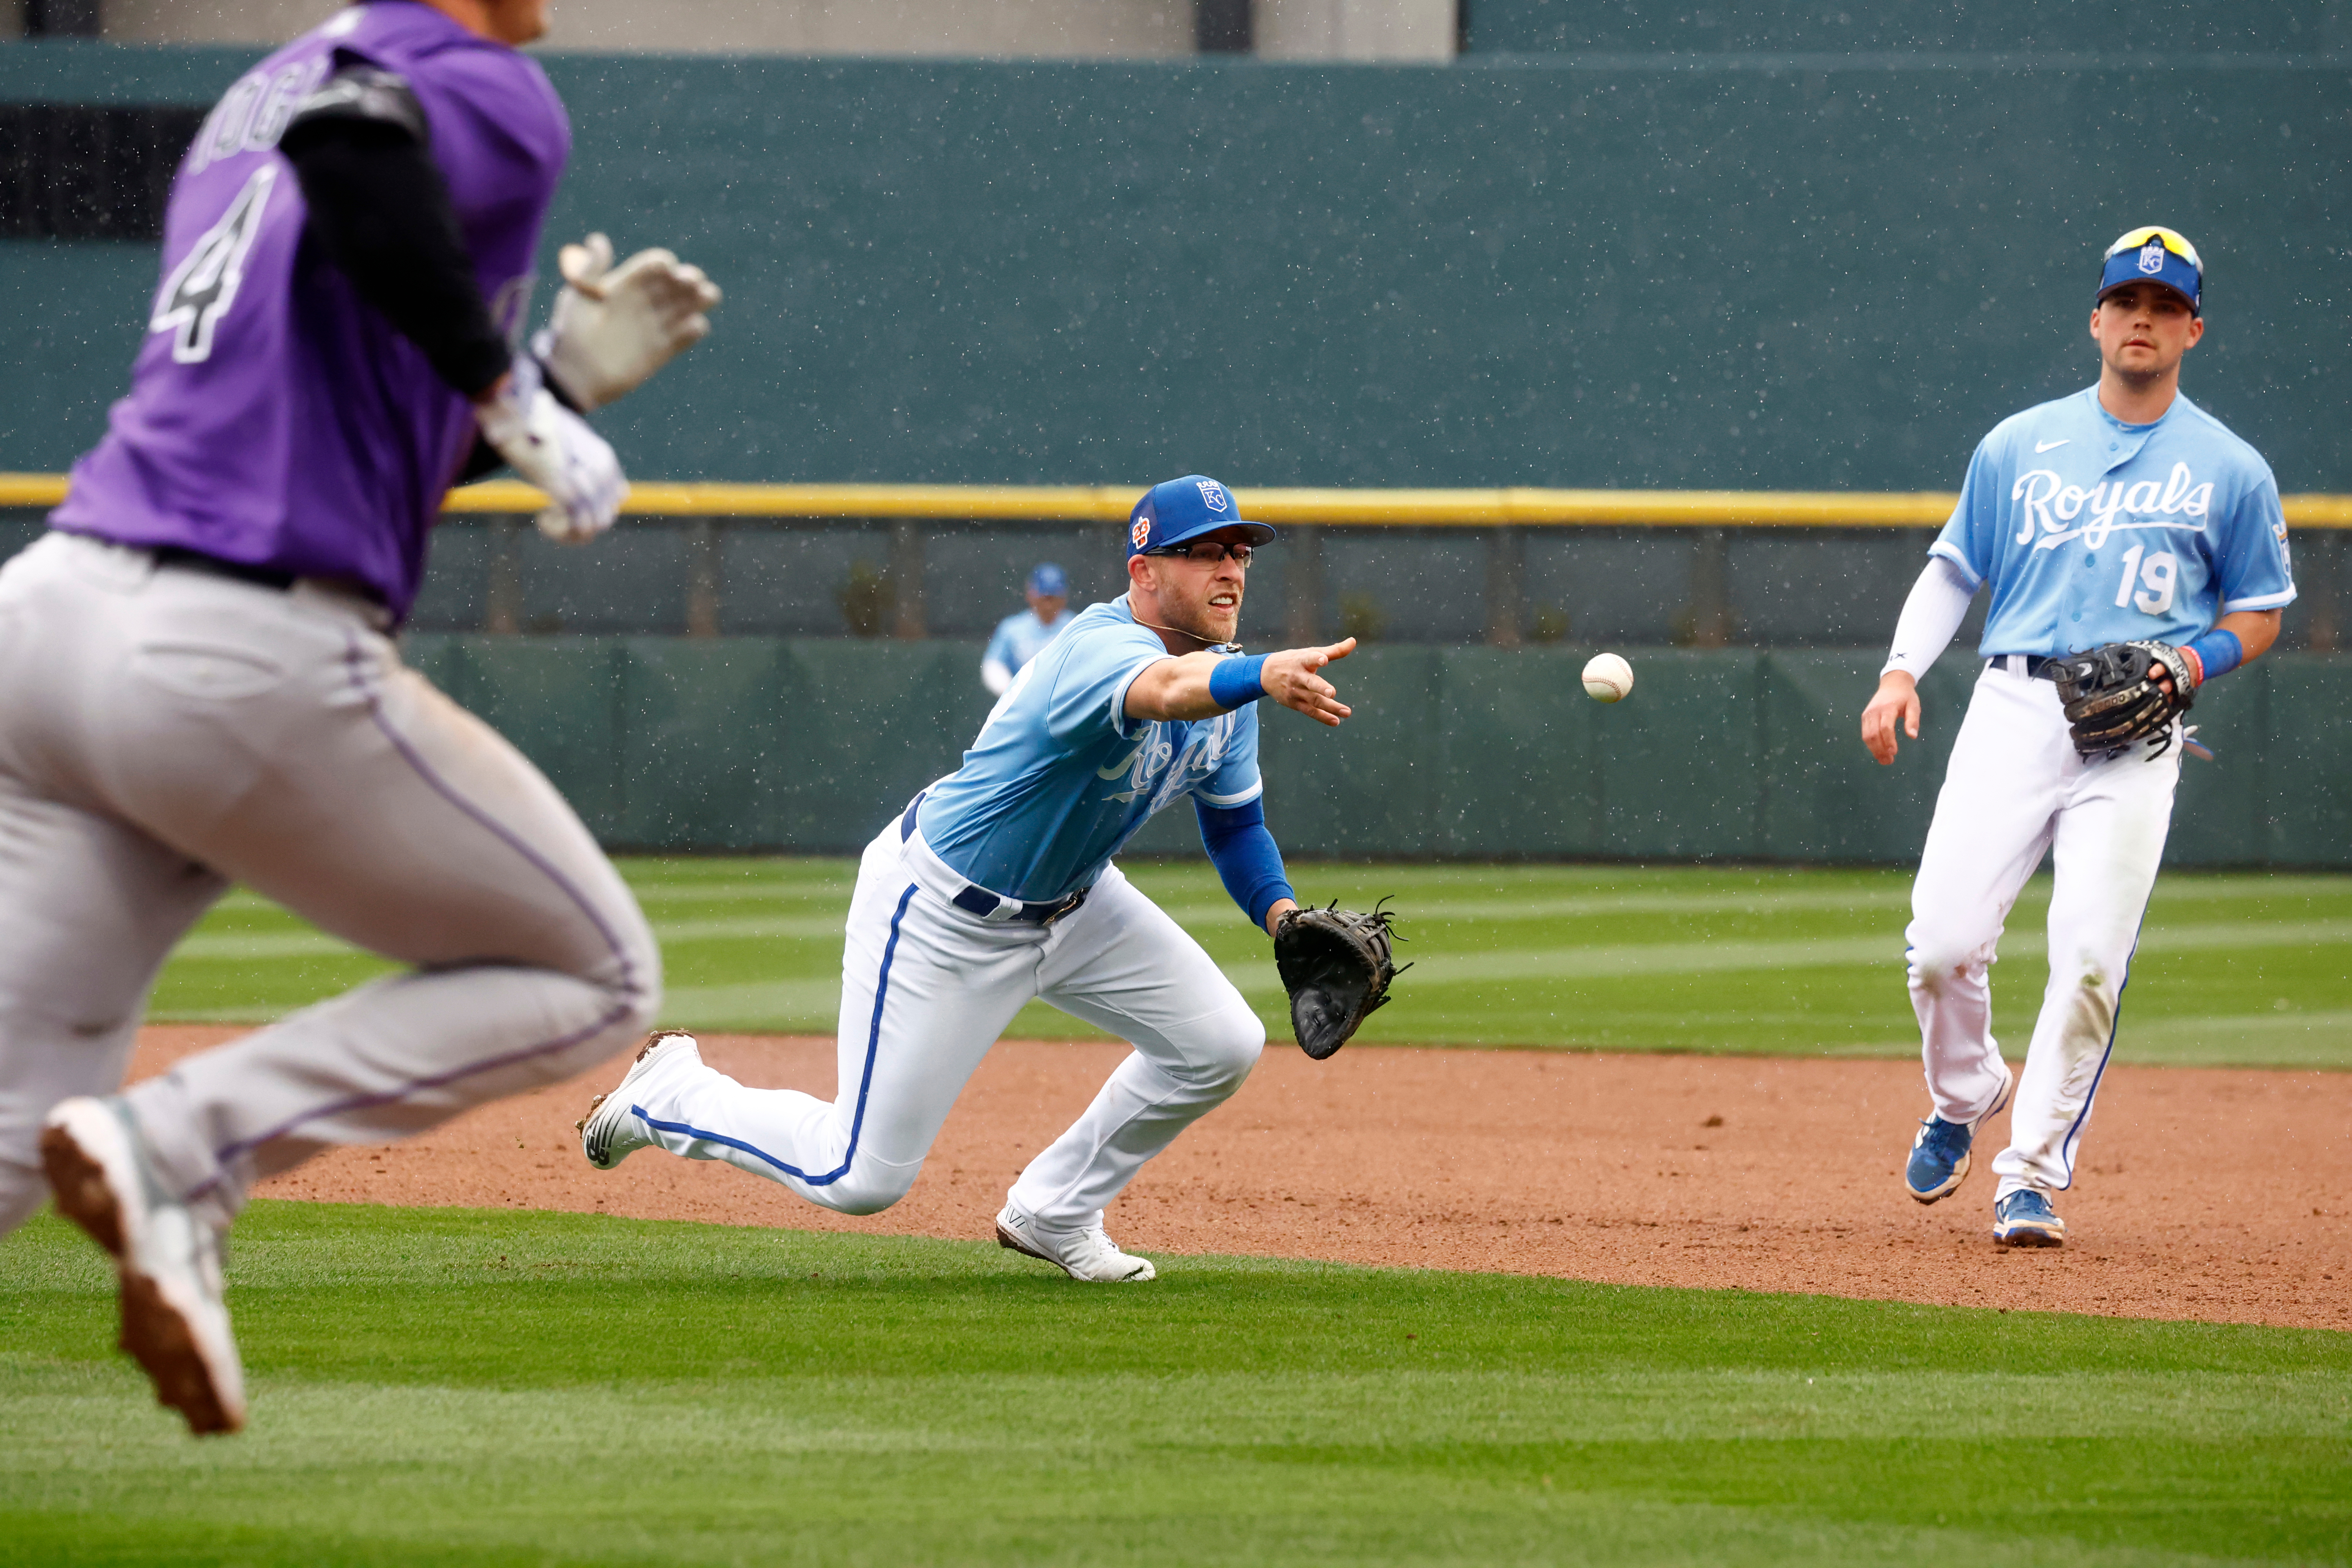 Matt Beaty (27) of the Kansas City Royals tosses the ball to first base during Big League Weekend featuring the Colorado Rockies versus the Kansas City Royals on March 19, 2023 at Las Vegas Ballpark in Las Vegas, Nevada.